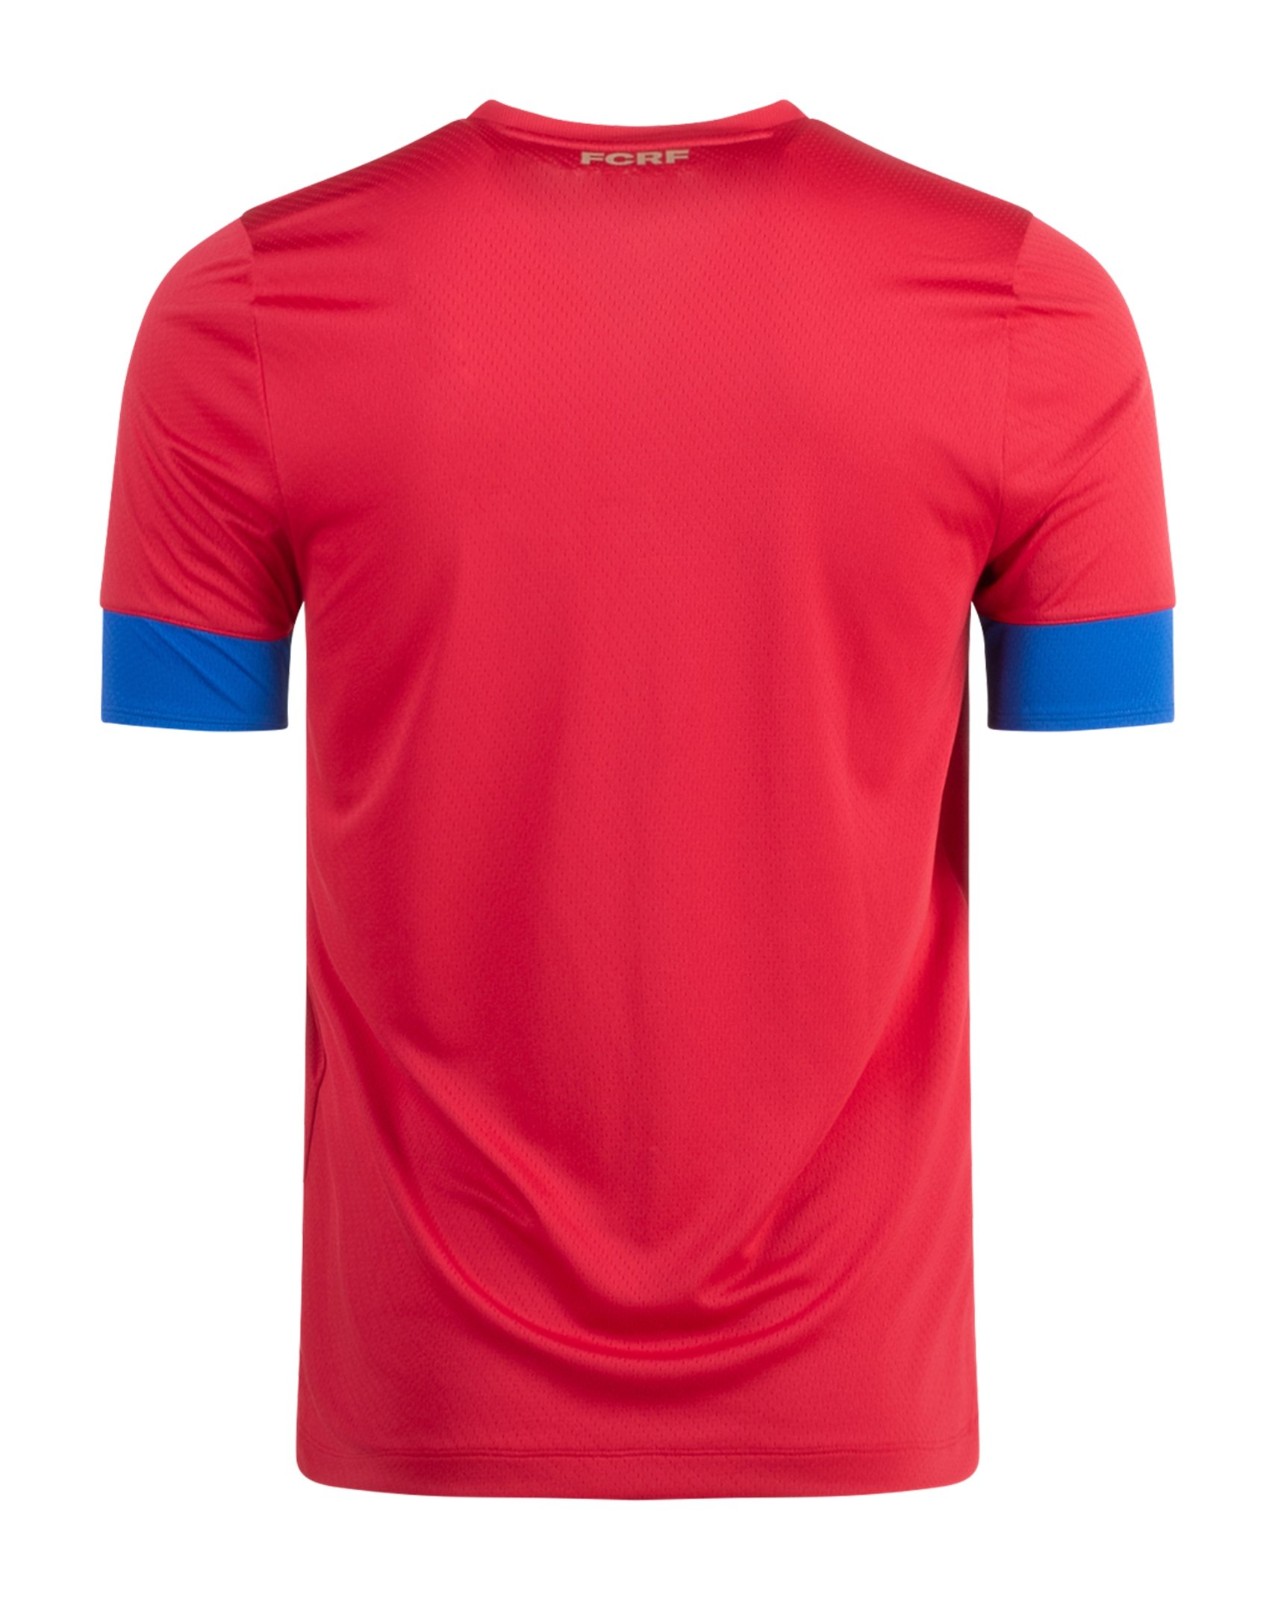 Costa Rica World Cup 2022 Home Kit Back